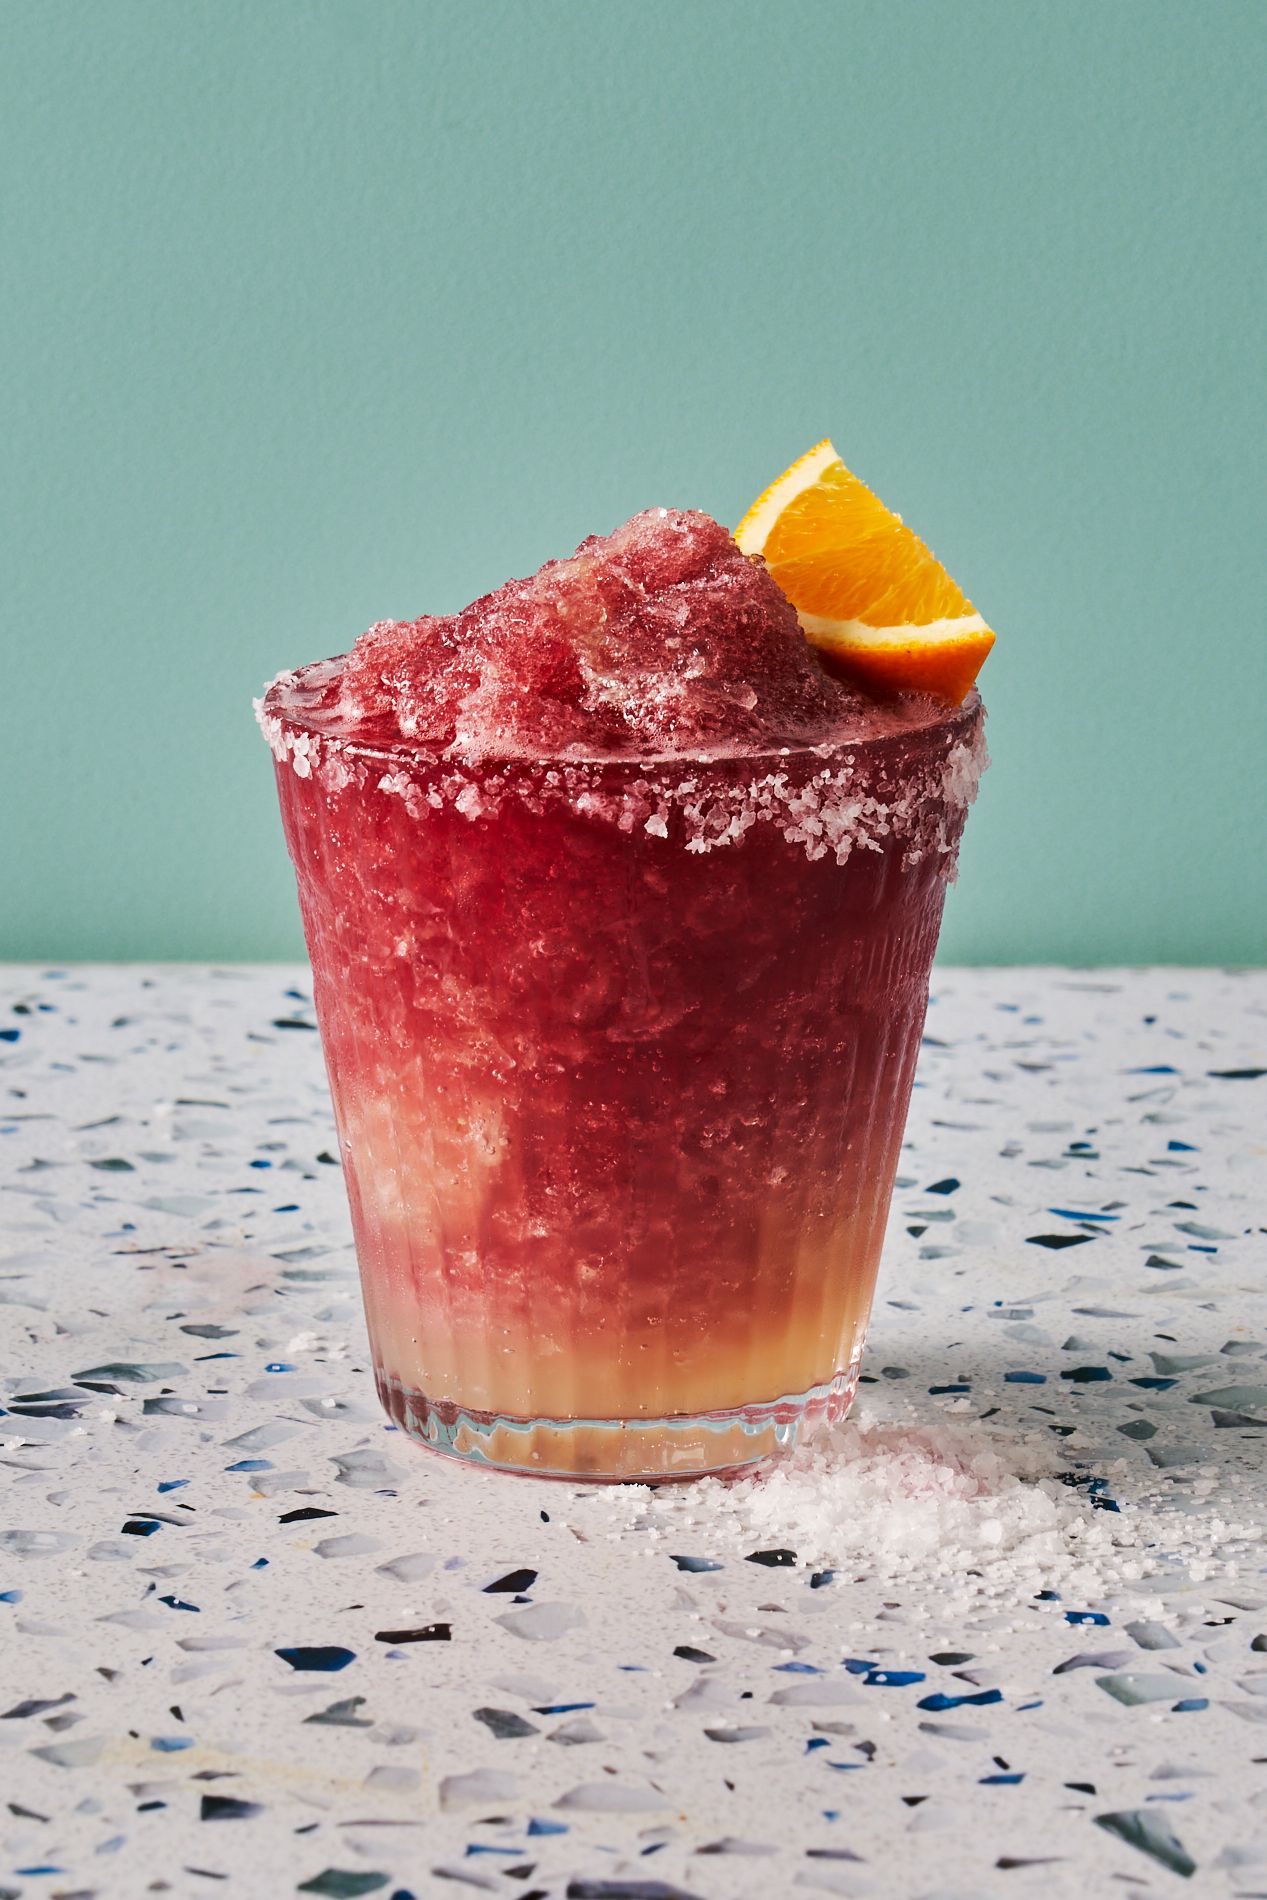 Glitter Ice Cocktails Make a Sparkling Addition to Any Holiday This Year